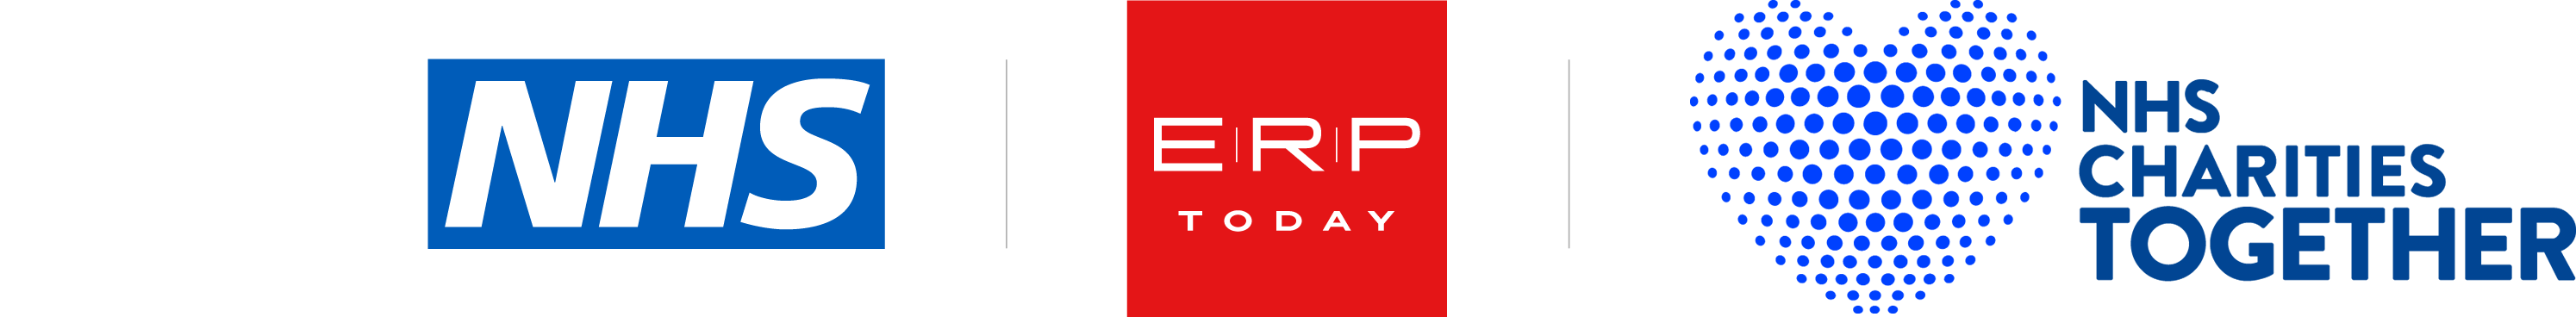 ERP Today, Automation Anywhere, NHS